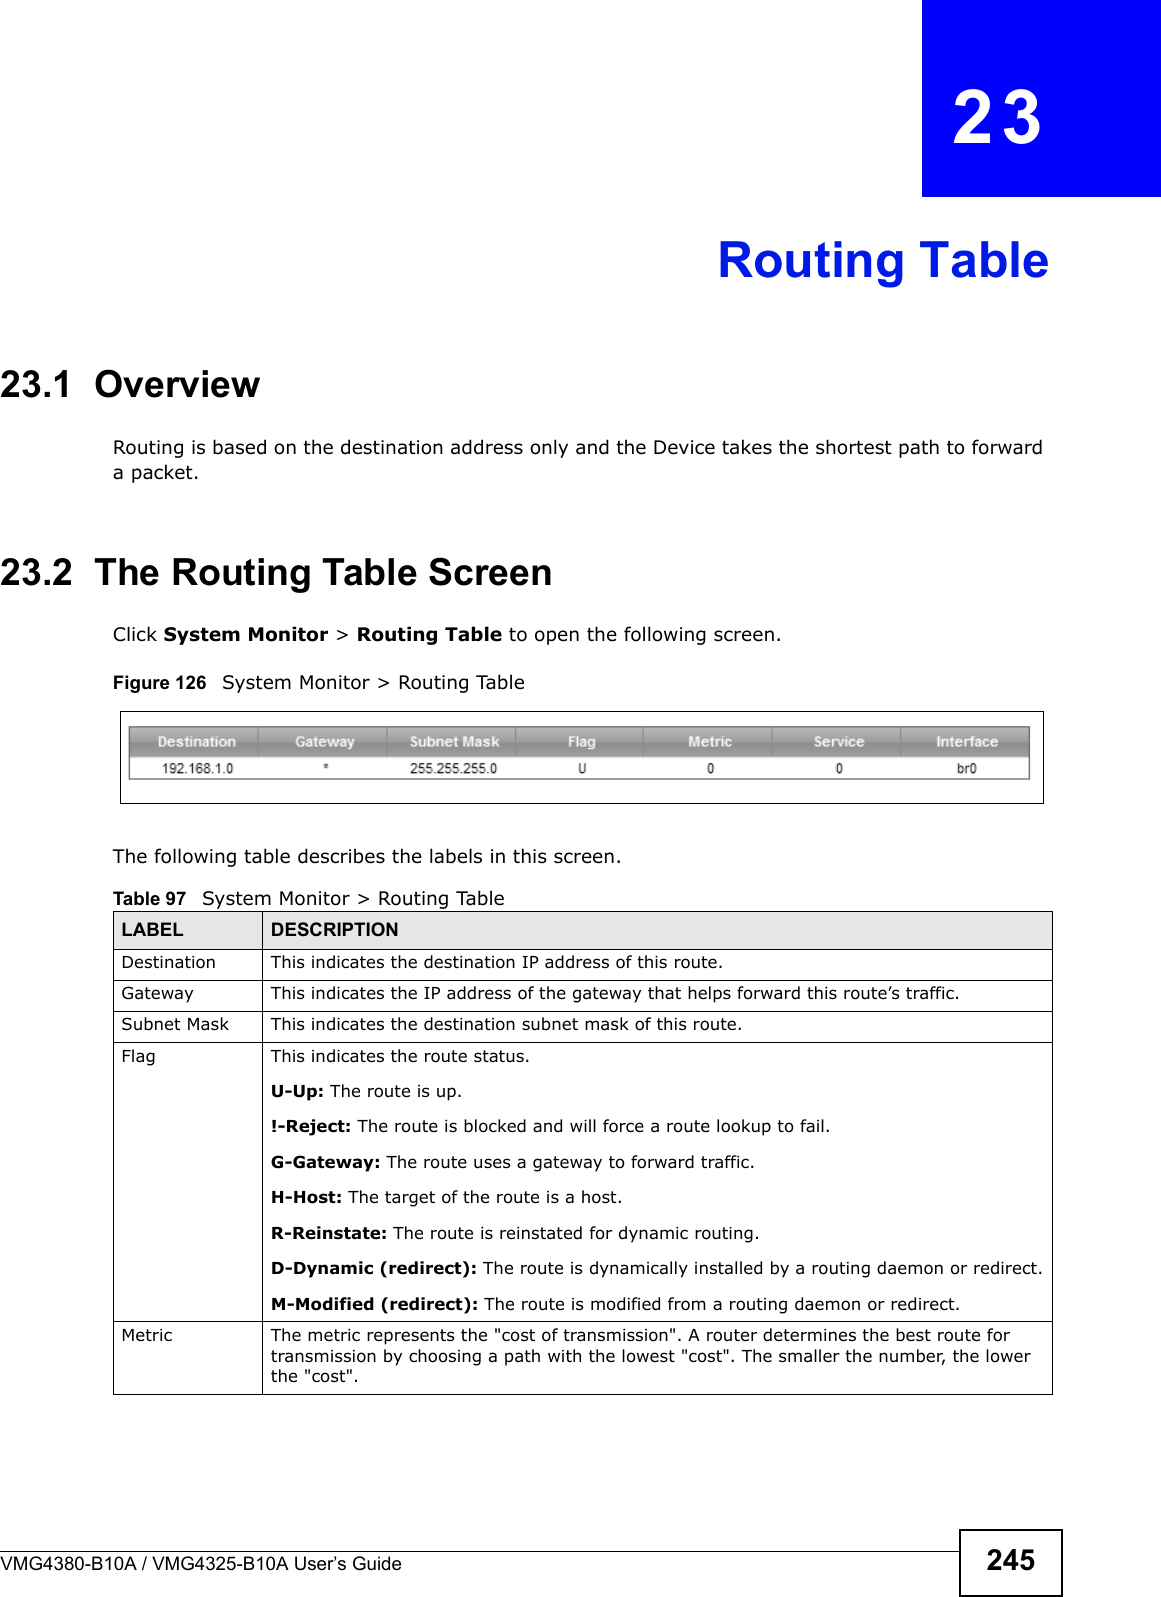 VMG4380-B10A / VMG4325-B10A User’s Guide 245CHAPTER  23Routing Table23.1  OverviewRouting is based on the destination address only and the Device takes the shortest path to forward a packet.23.2  The Routing Table ScreenClick System Monitor &gt; Routing Table to open the following screen.Figure 126   System Monitor &gt; Routing TableThe following table describes the labels in this screen.Table 97   System Monitor &gt; Routing TableLABEL DESCRIPTIONDestination This indicates the destination IP address of this route.Gateway This indicates the IP address of the gateway that helps forward this route’s traffic.Subnet Mask This indicates the destination subnet mask of this route.Flag This indicates the route status.U-Up: The route is up.!-Reject: The route is blocked and will force a route lookup to fail.G-Gateway: The route uses a gateway to forward traffic. H-Host: The target of the route is a host.R-Reinstate: The route is reinstated for dynamic routing.D-Dynamic (redirect): The route is dynamically installed by a routing daemon or redirect.M-Modified (redirect): The route is modified from a routing daemon or redirect.Metric The metric represents the &quot;cost of transmission&quot;. A router determines the best route for transmission by choosing a path with the lowest &quot;cost&quot;. The smaller the number, the lower the &quot;cost&quot;.